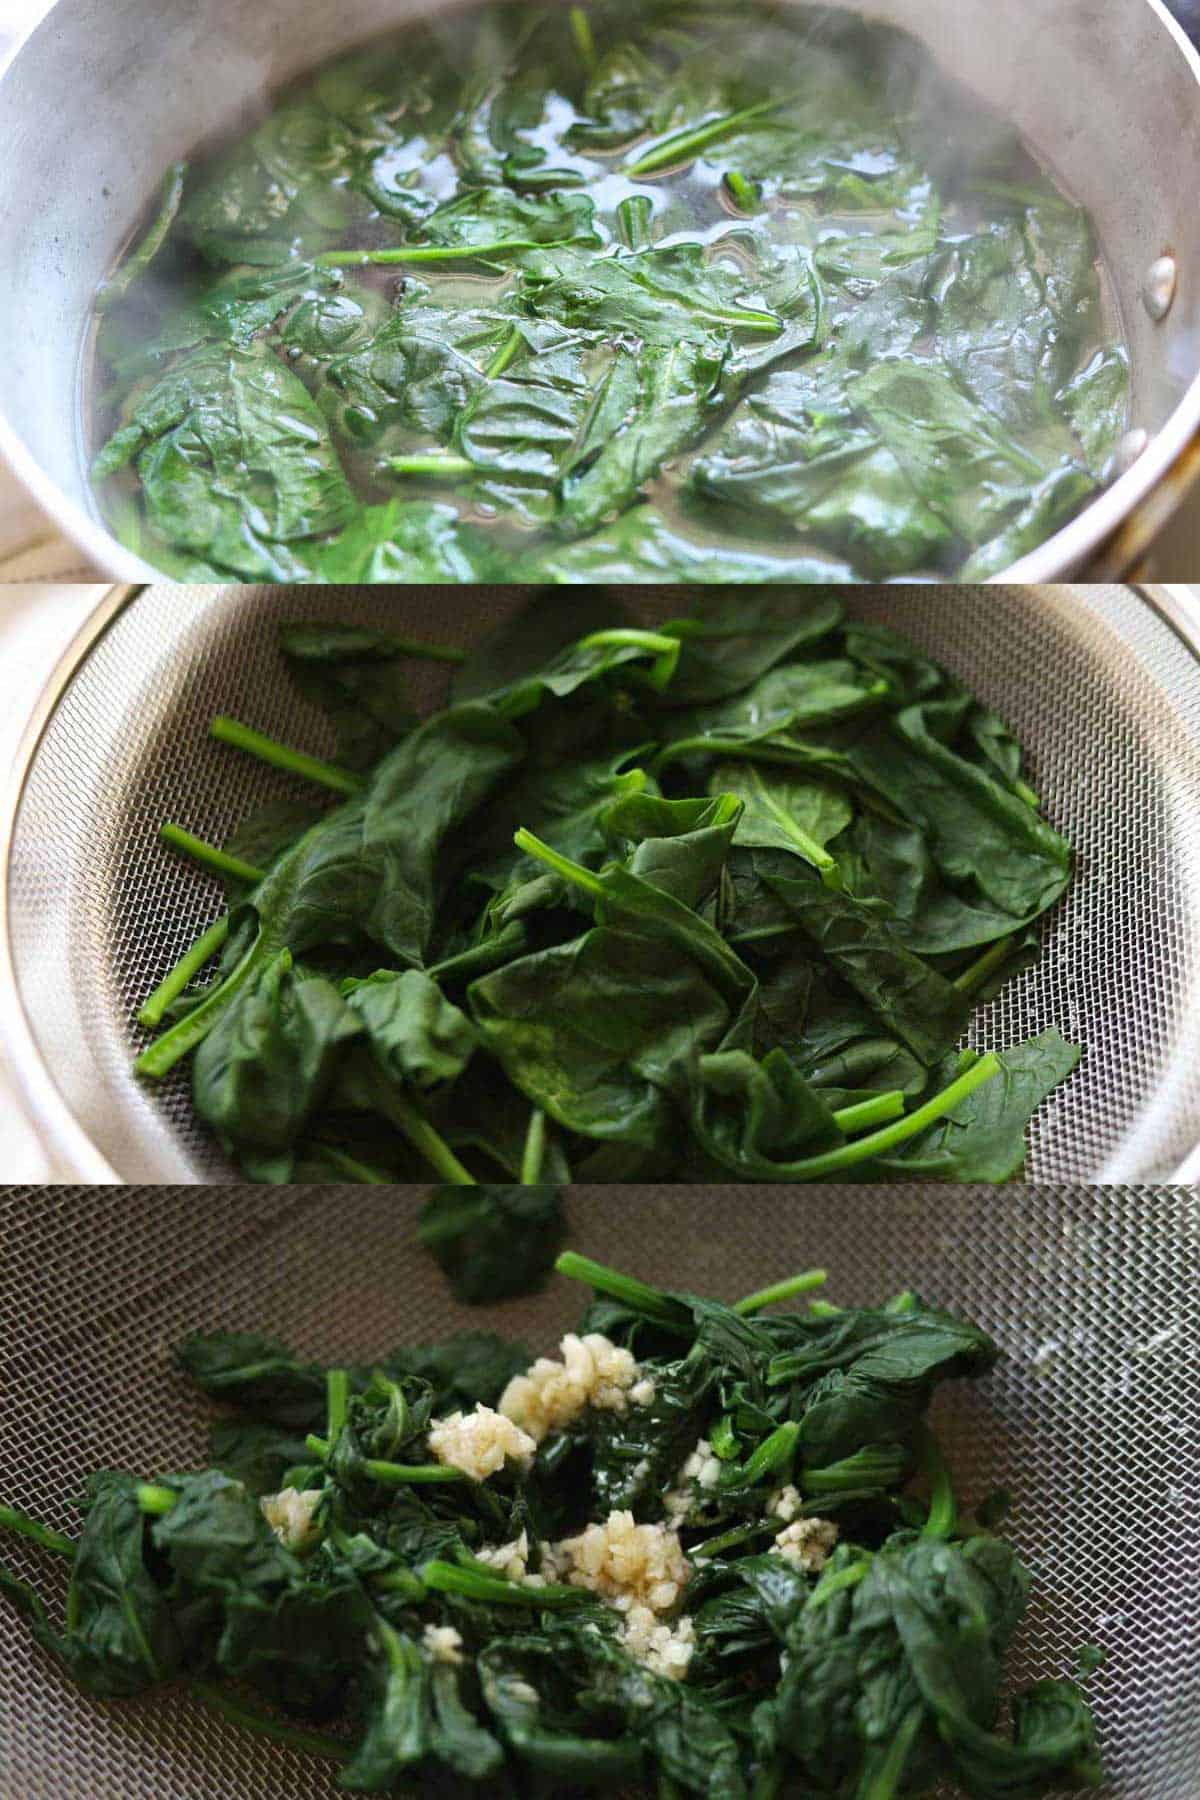 Collage of three images. Top image of  spinach cooking in hot water. Middle image of spinach draining in colander. Bottom image of cooked spinach with garlic seasoning.